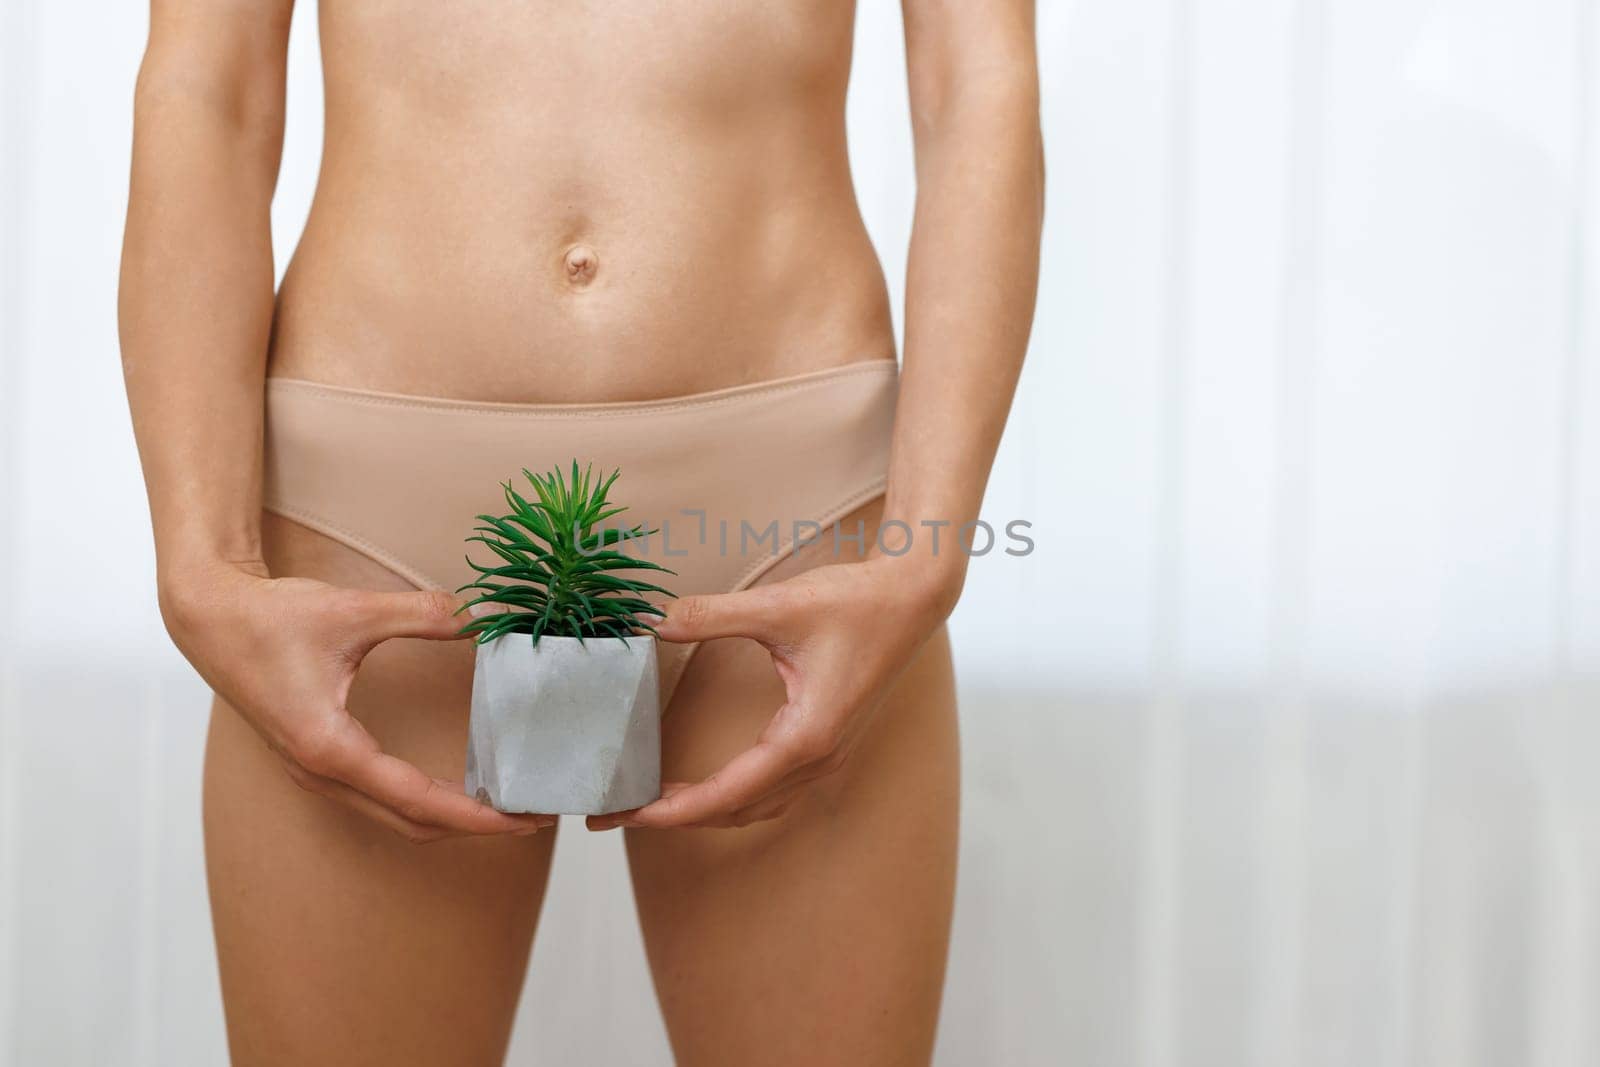 Depilation And Health Care In Underwear With Cactus In Hand. Woman with cactus showing smooth skin on background, closeup. Brazilian bikini epilation